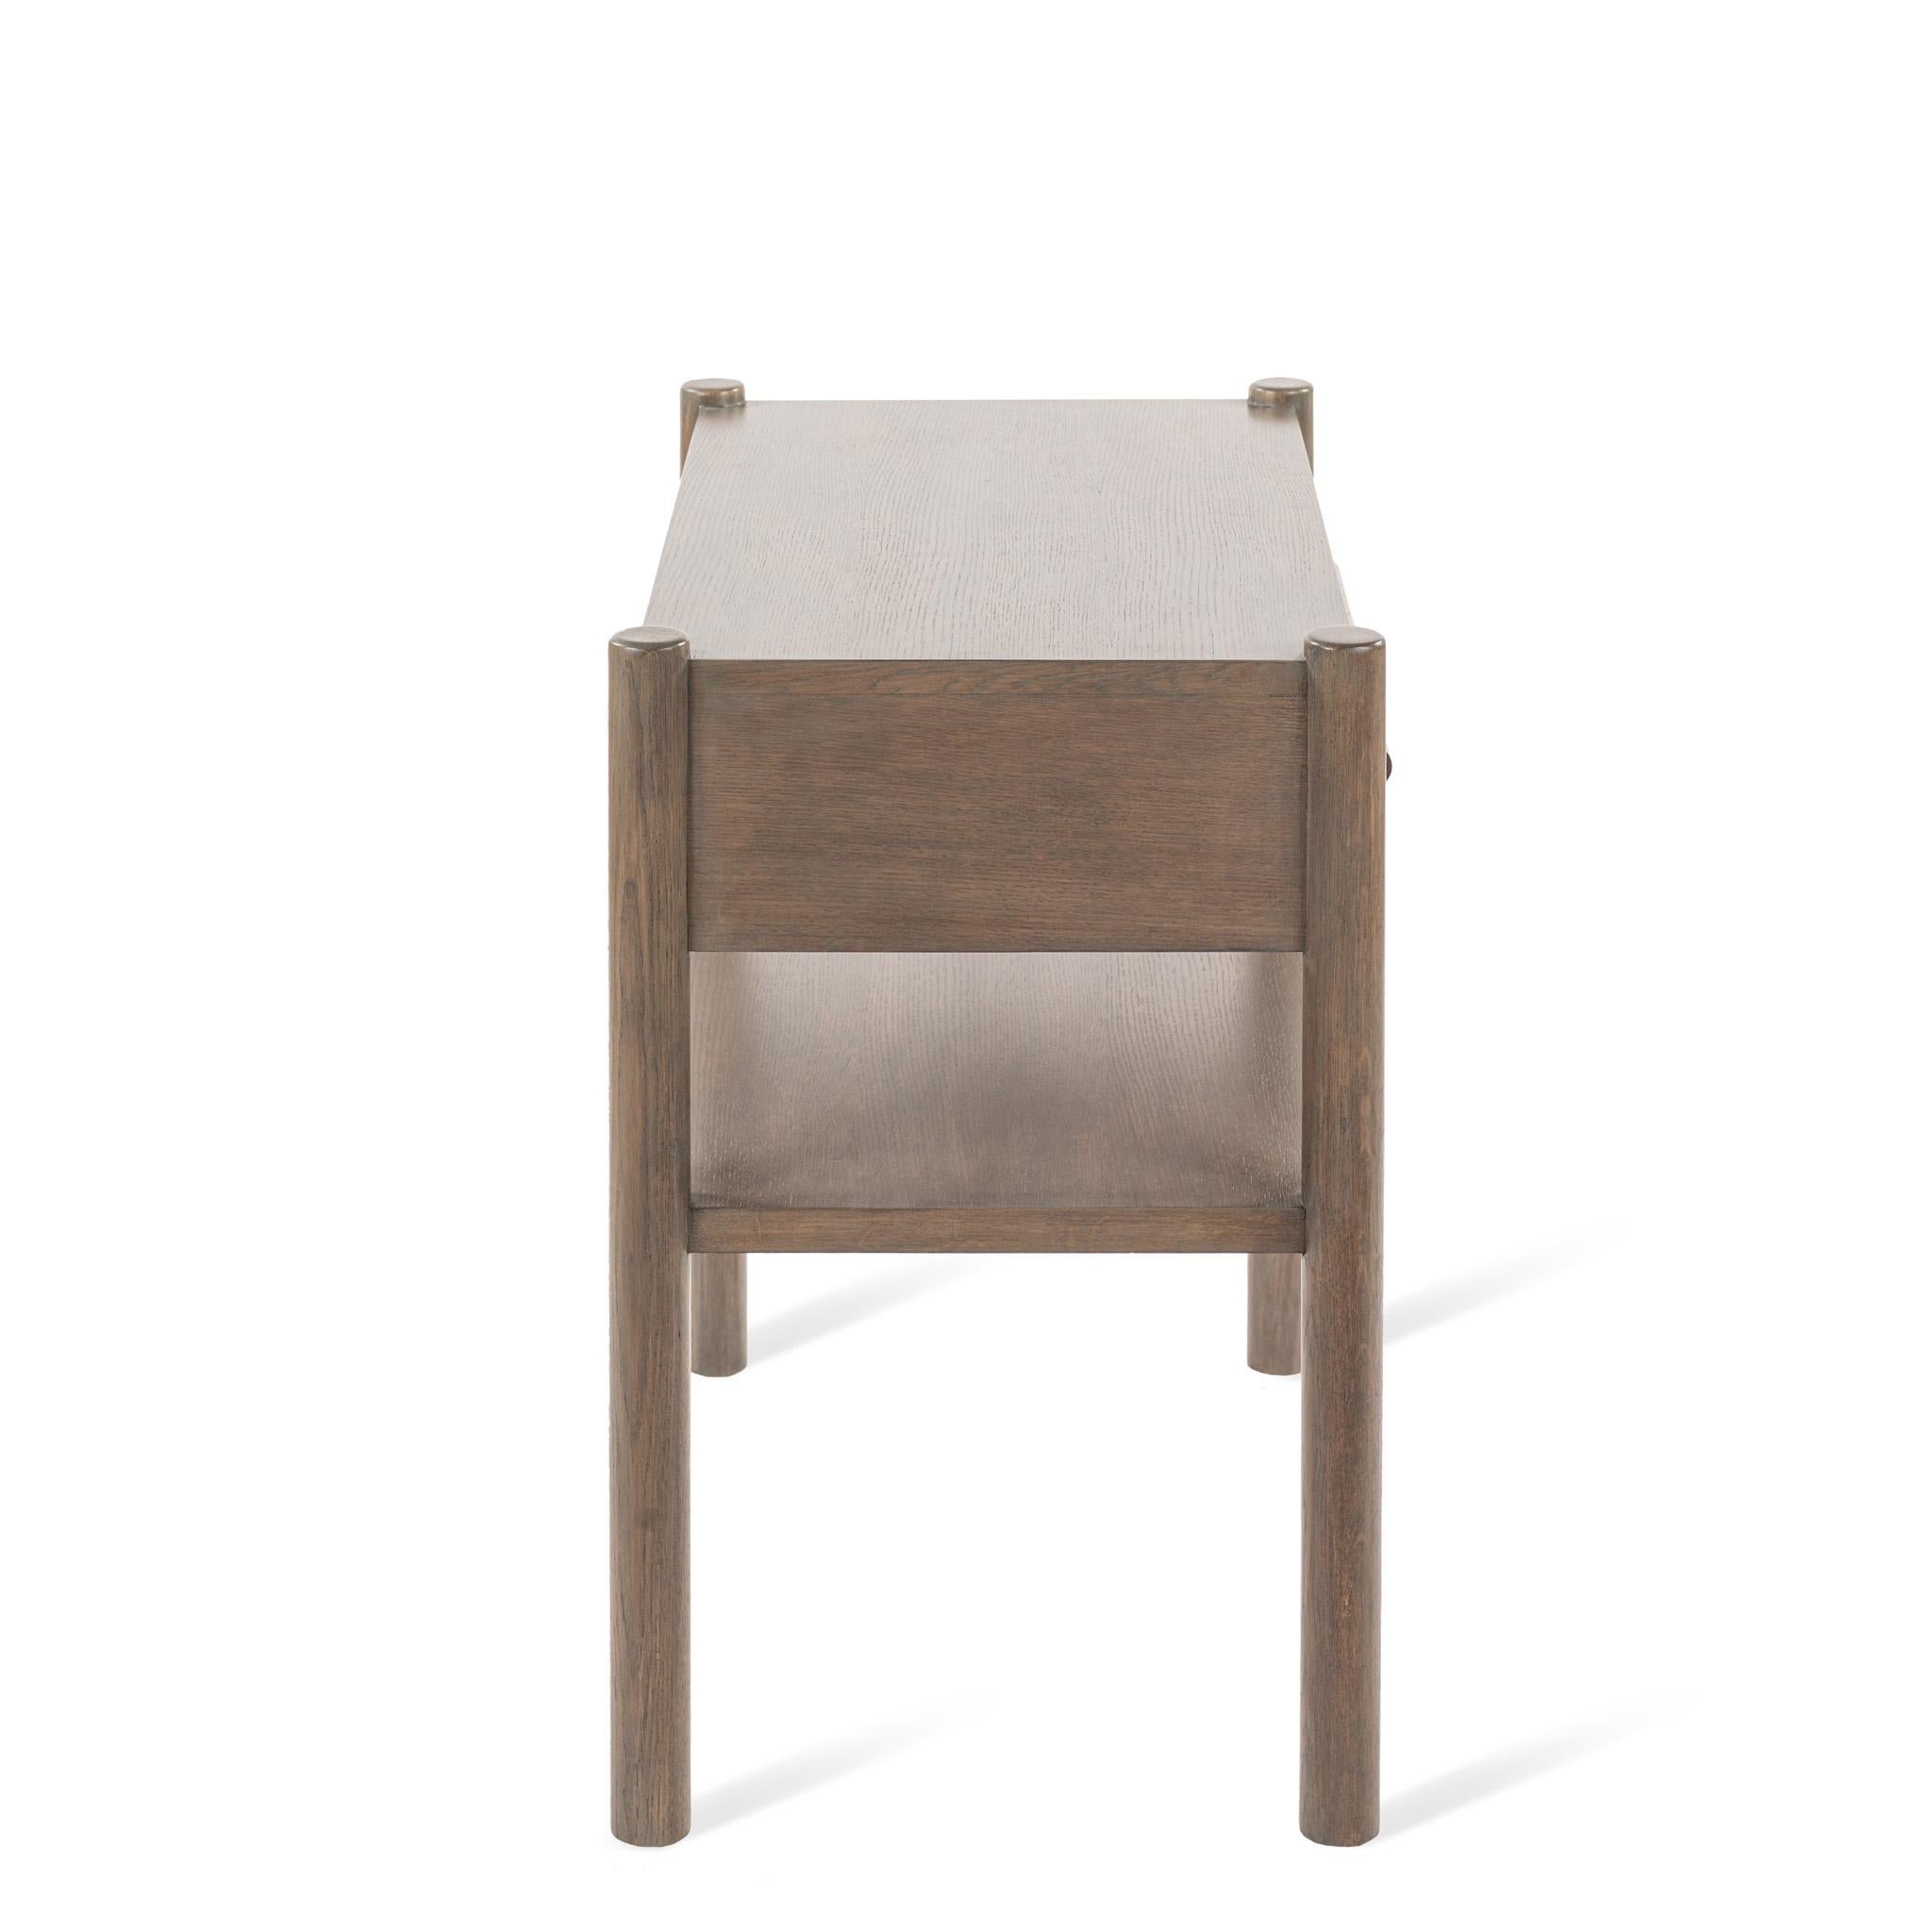 Designed by Josh Greene.
Nightstand with dowel shaped legs and drawer handle.

Also available in a smaller 18 x 18 size. 